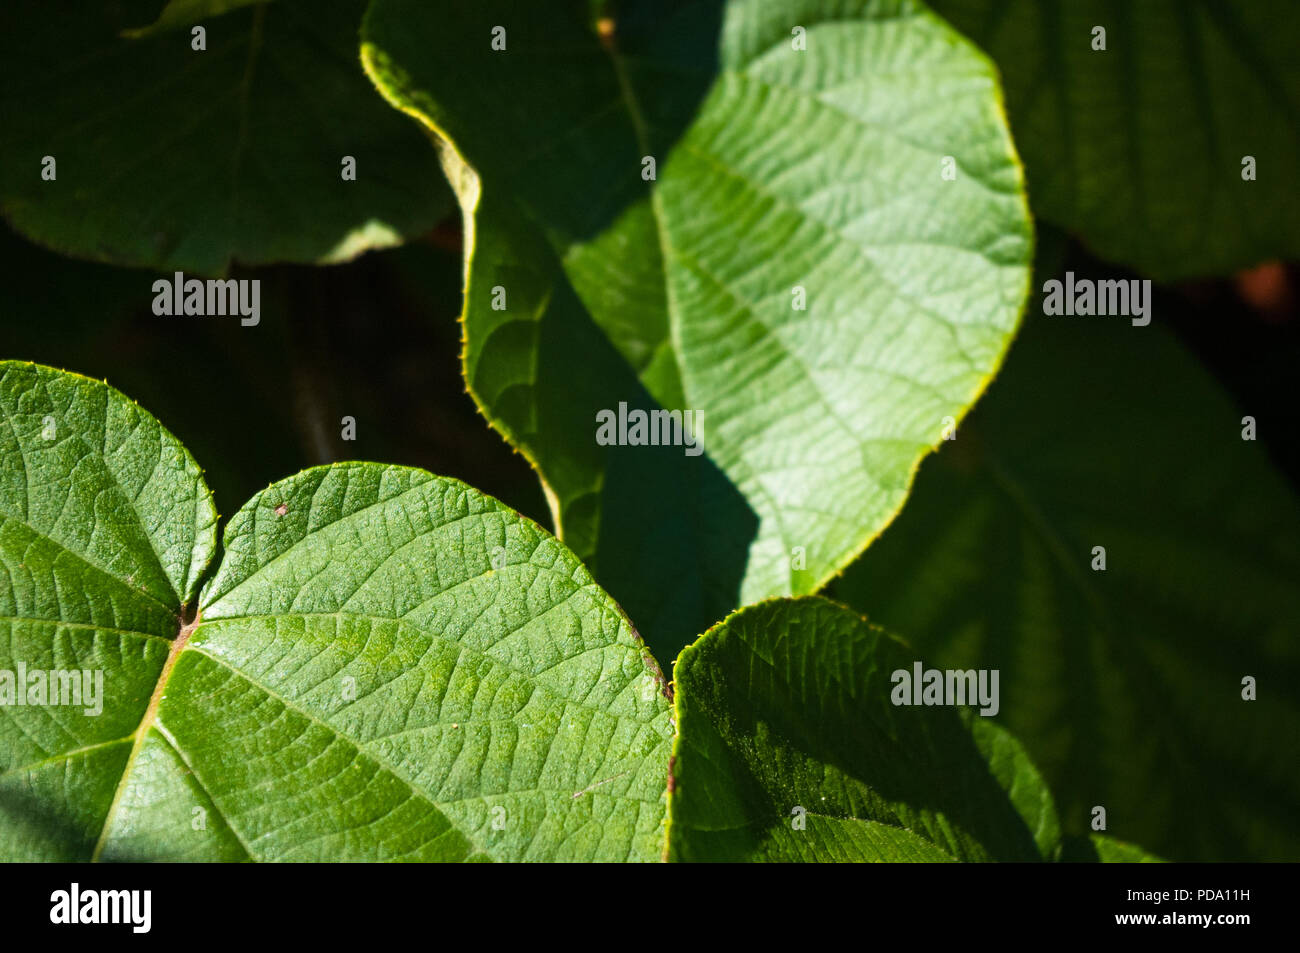 Green bright rough kiwi leaves on the vine, close up Stock Photo